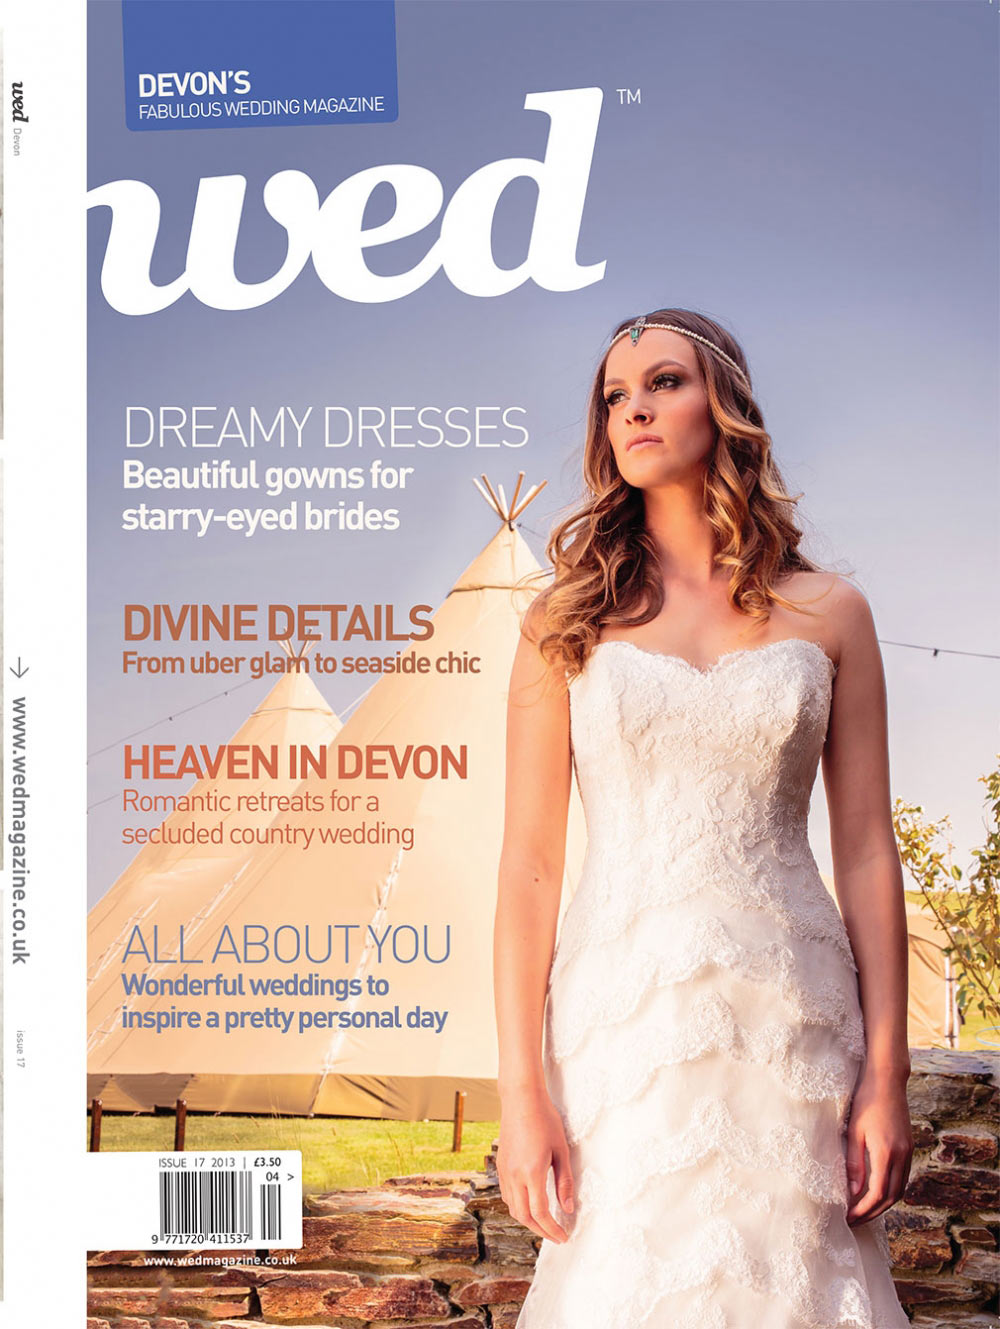 New Wed Devon Out Now!